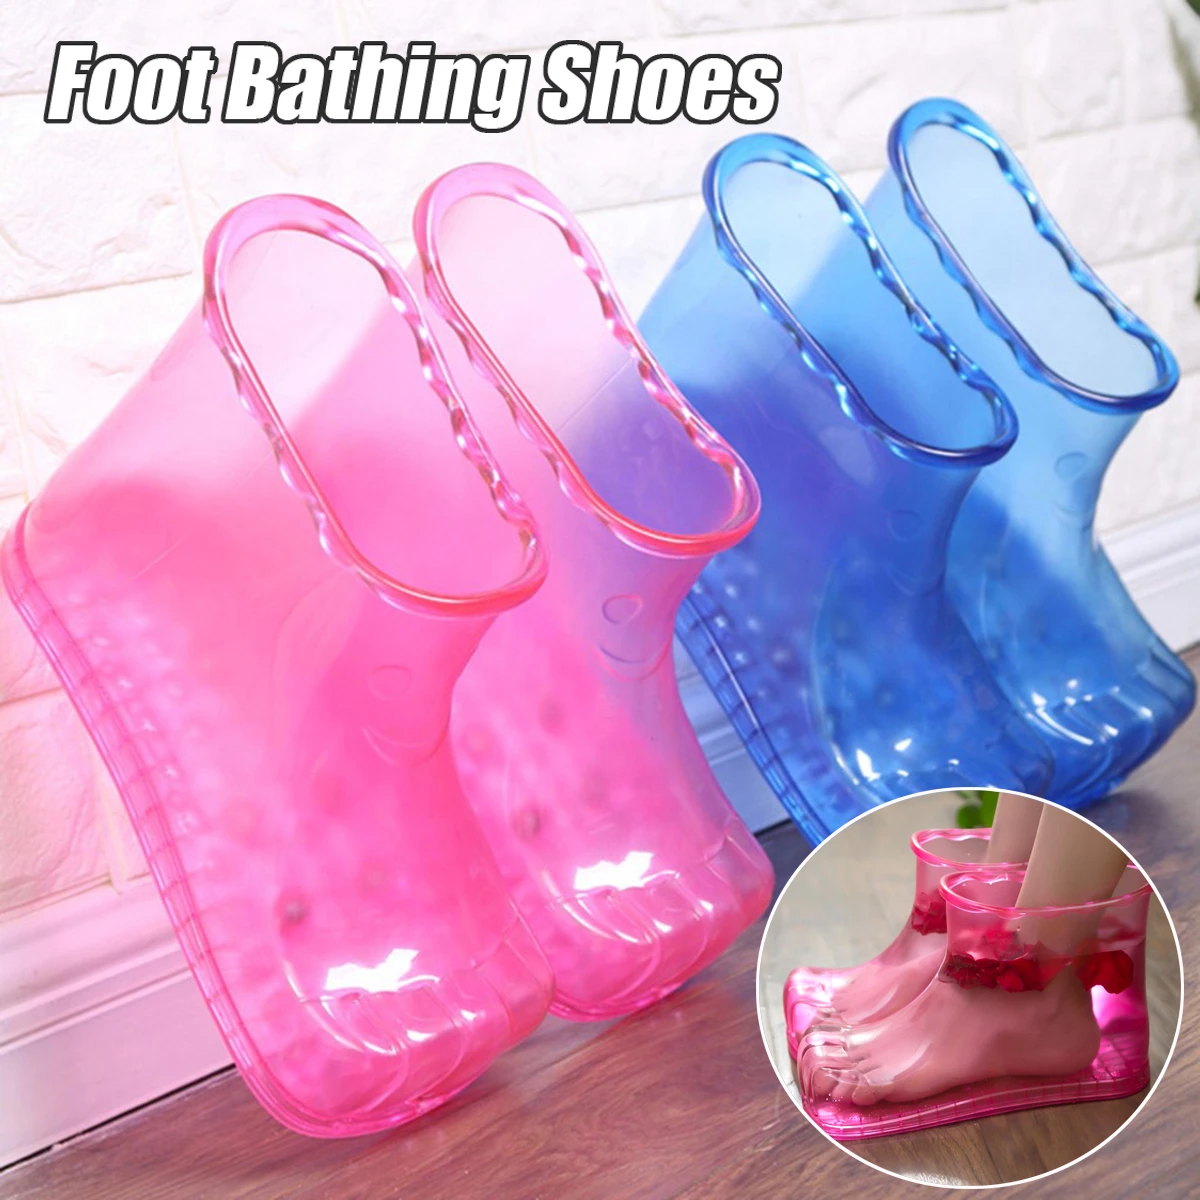 Women Foot Soak Bath Therapy Massage Shoes Ankle Boots Sole Relaxation Home Feet Care Hot water Neutral Foot Soak 25.6cm